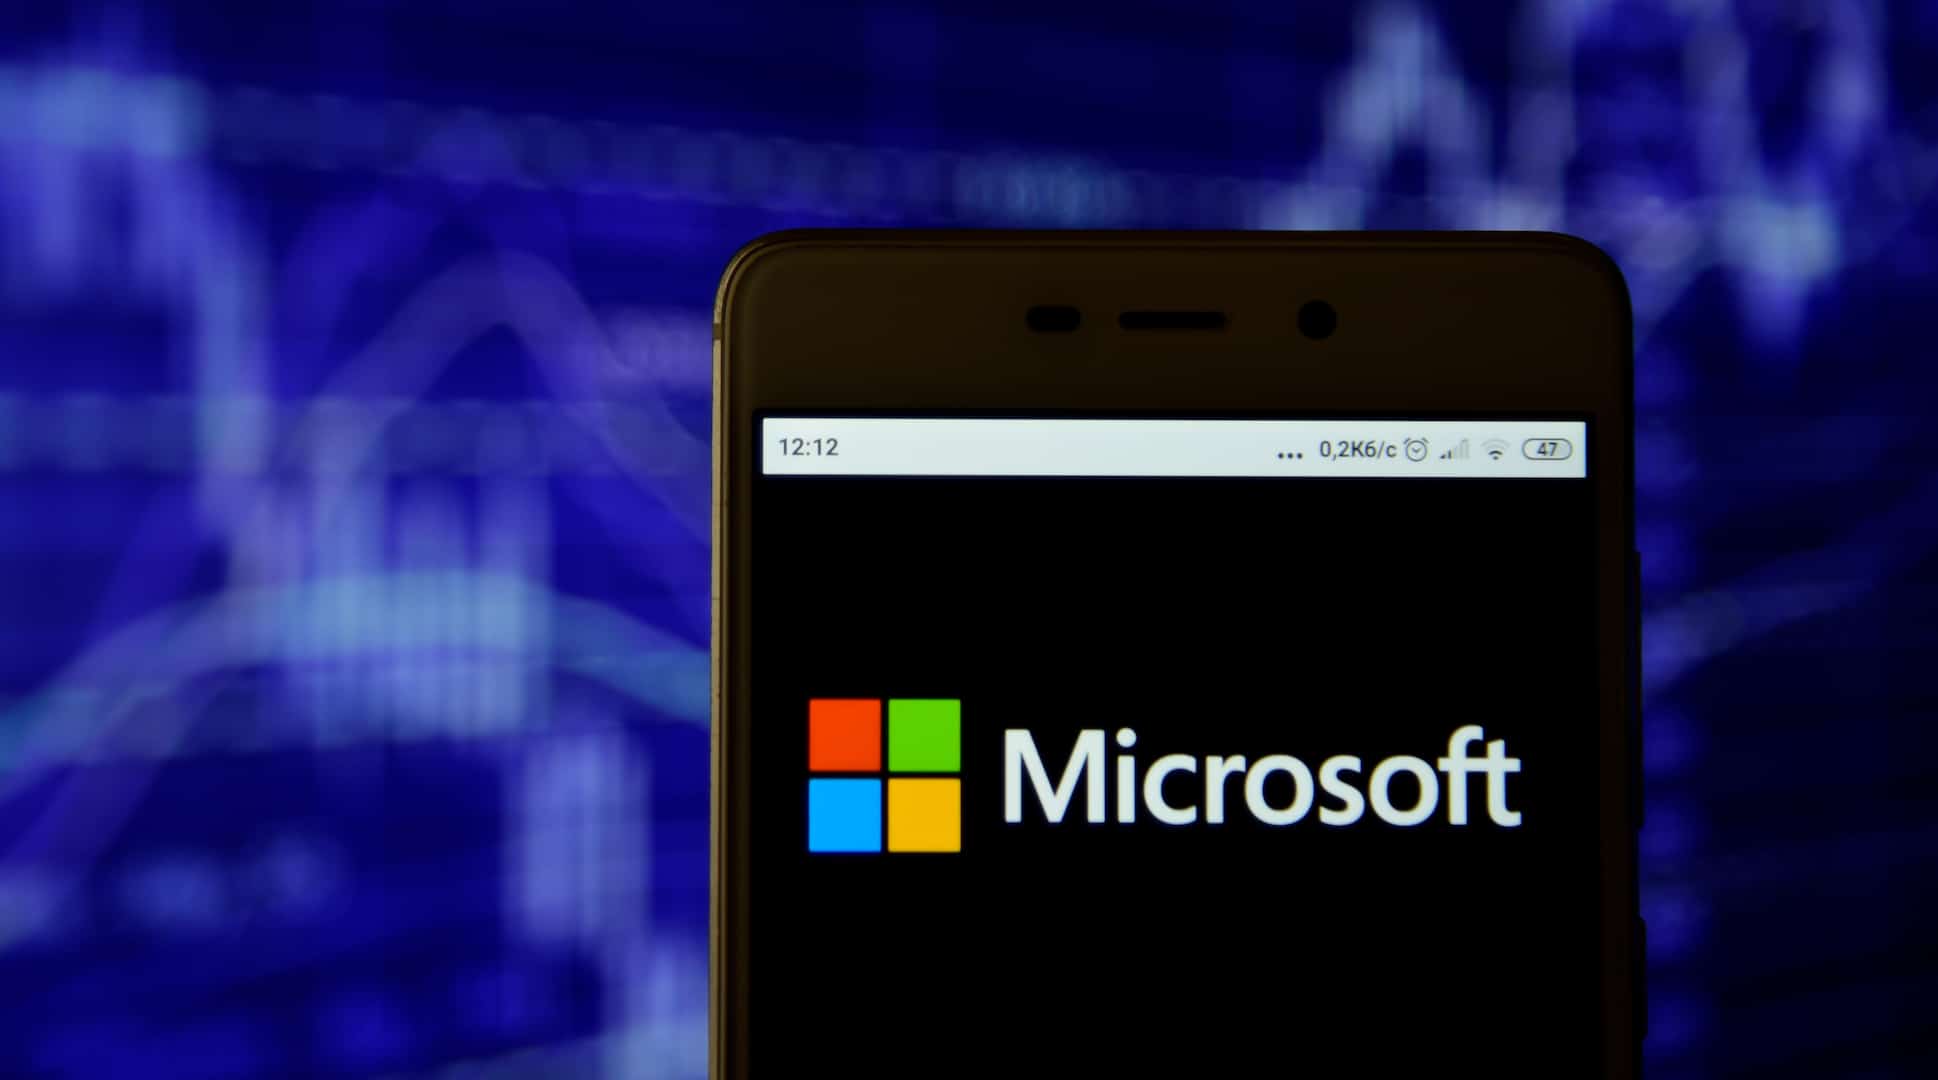 Microsoft Advertising launches new tool for enhanced ad revenue analytics